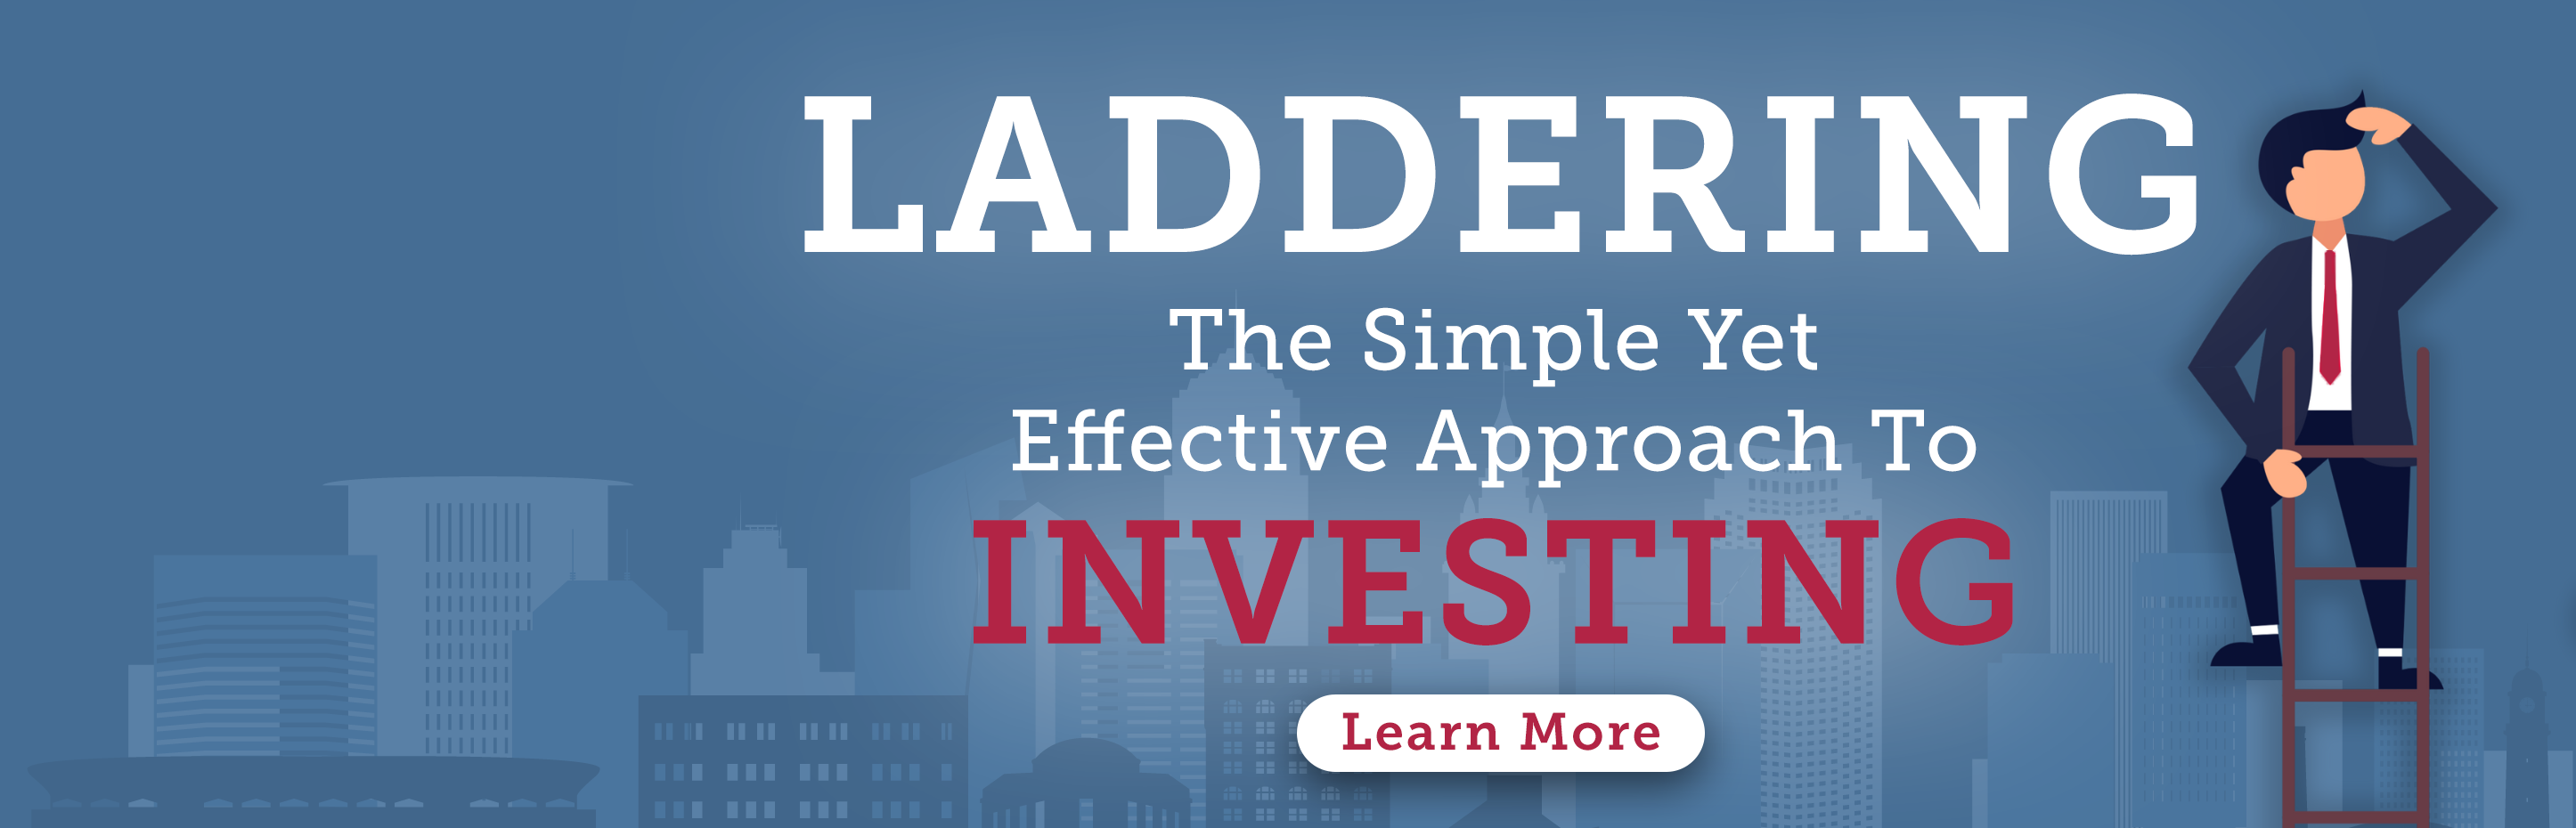 LADDERING
The Simple Yet Effective
Approach to Investing
LEARN MORE